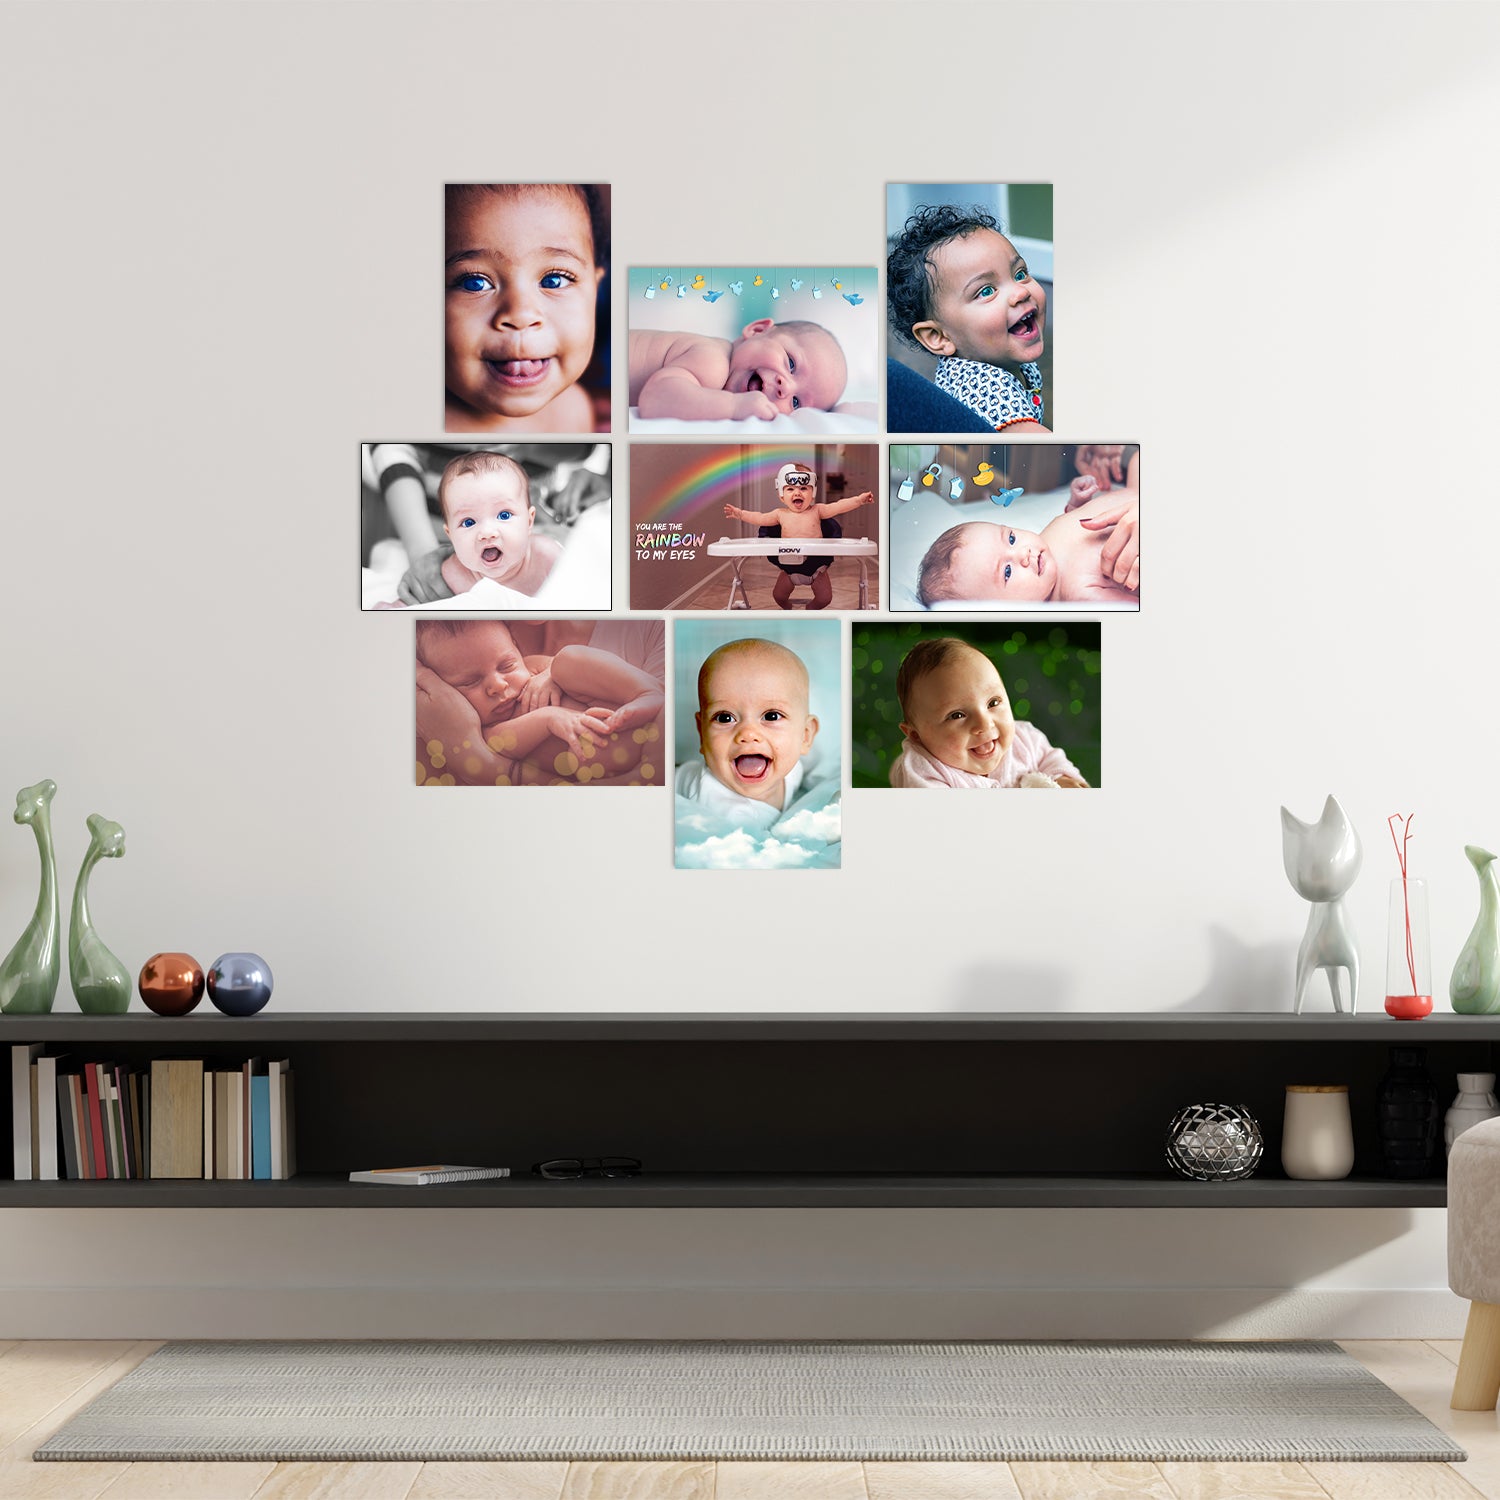 Set of 10 Cute Baby Wall High Quality Printed 300 GSM Posters for Pregnant Women with Glue Drops